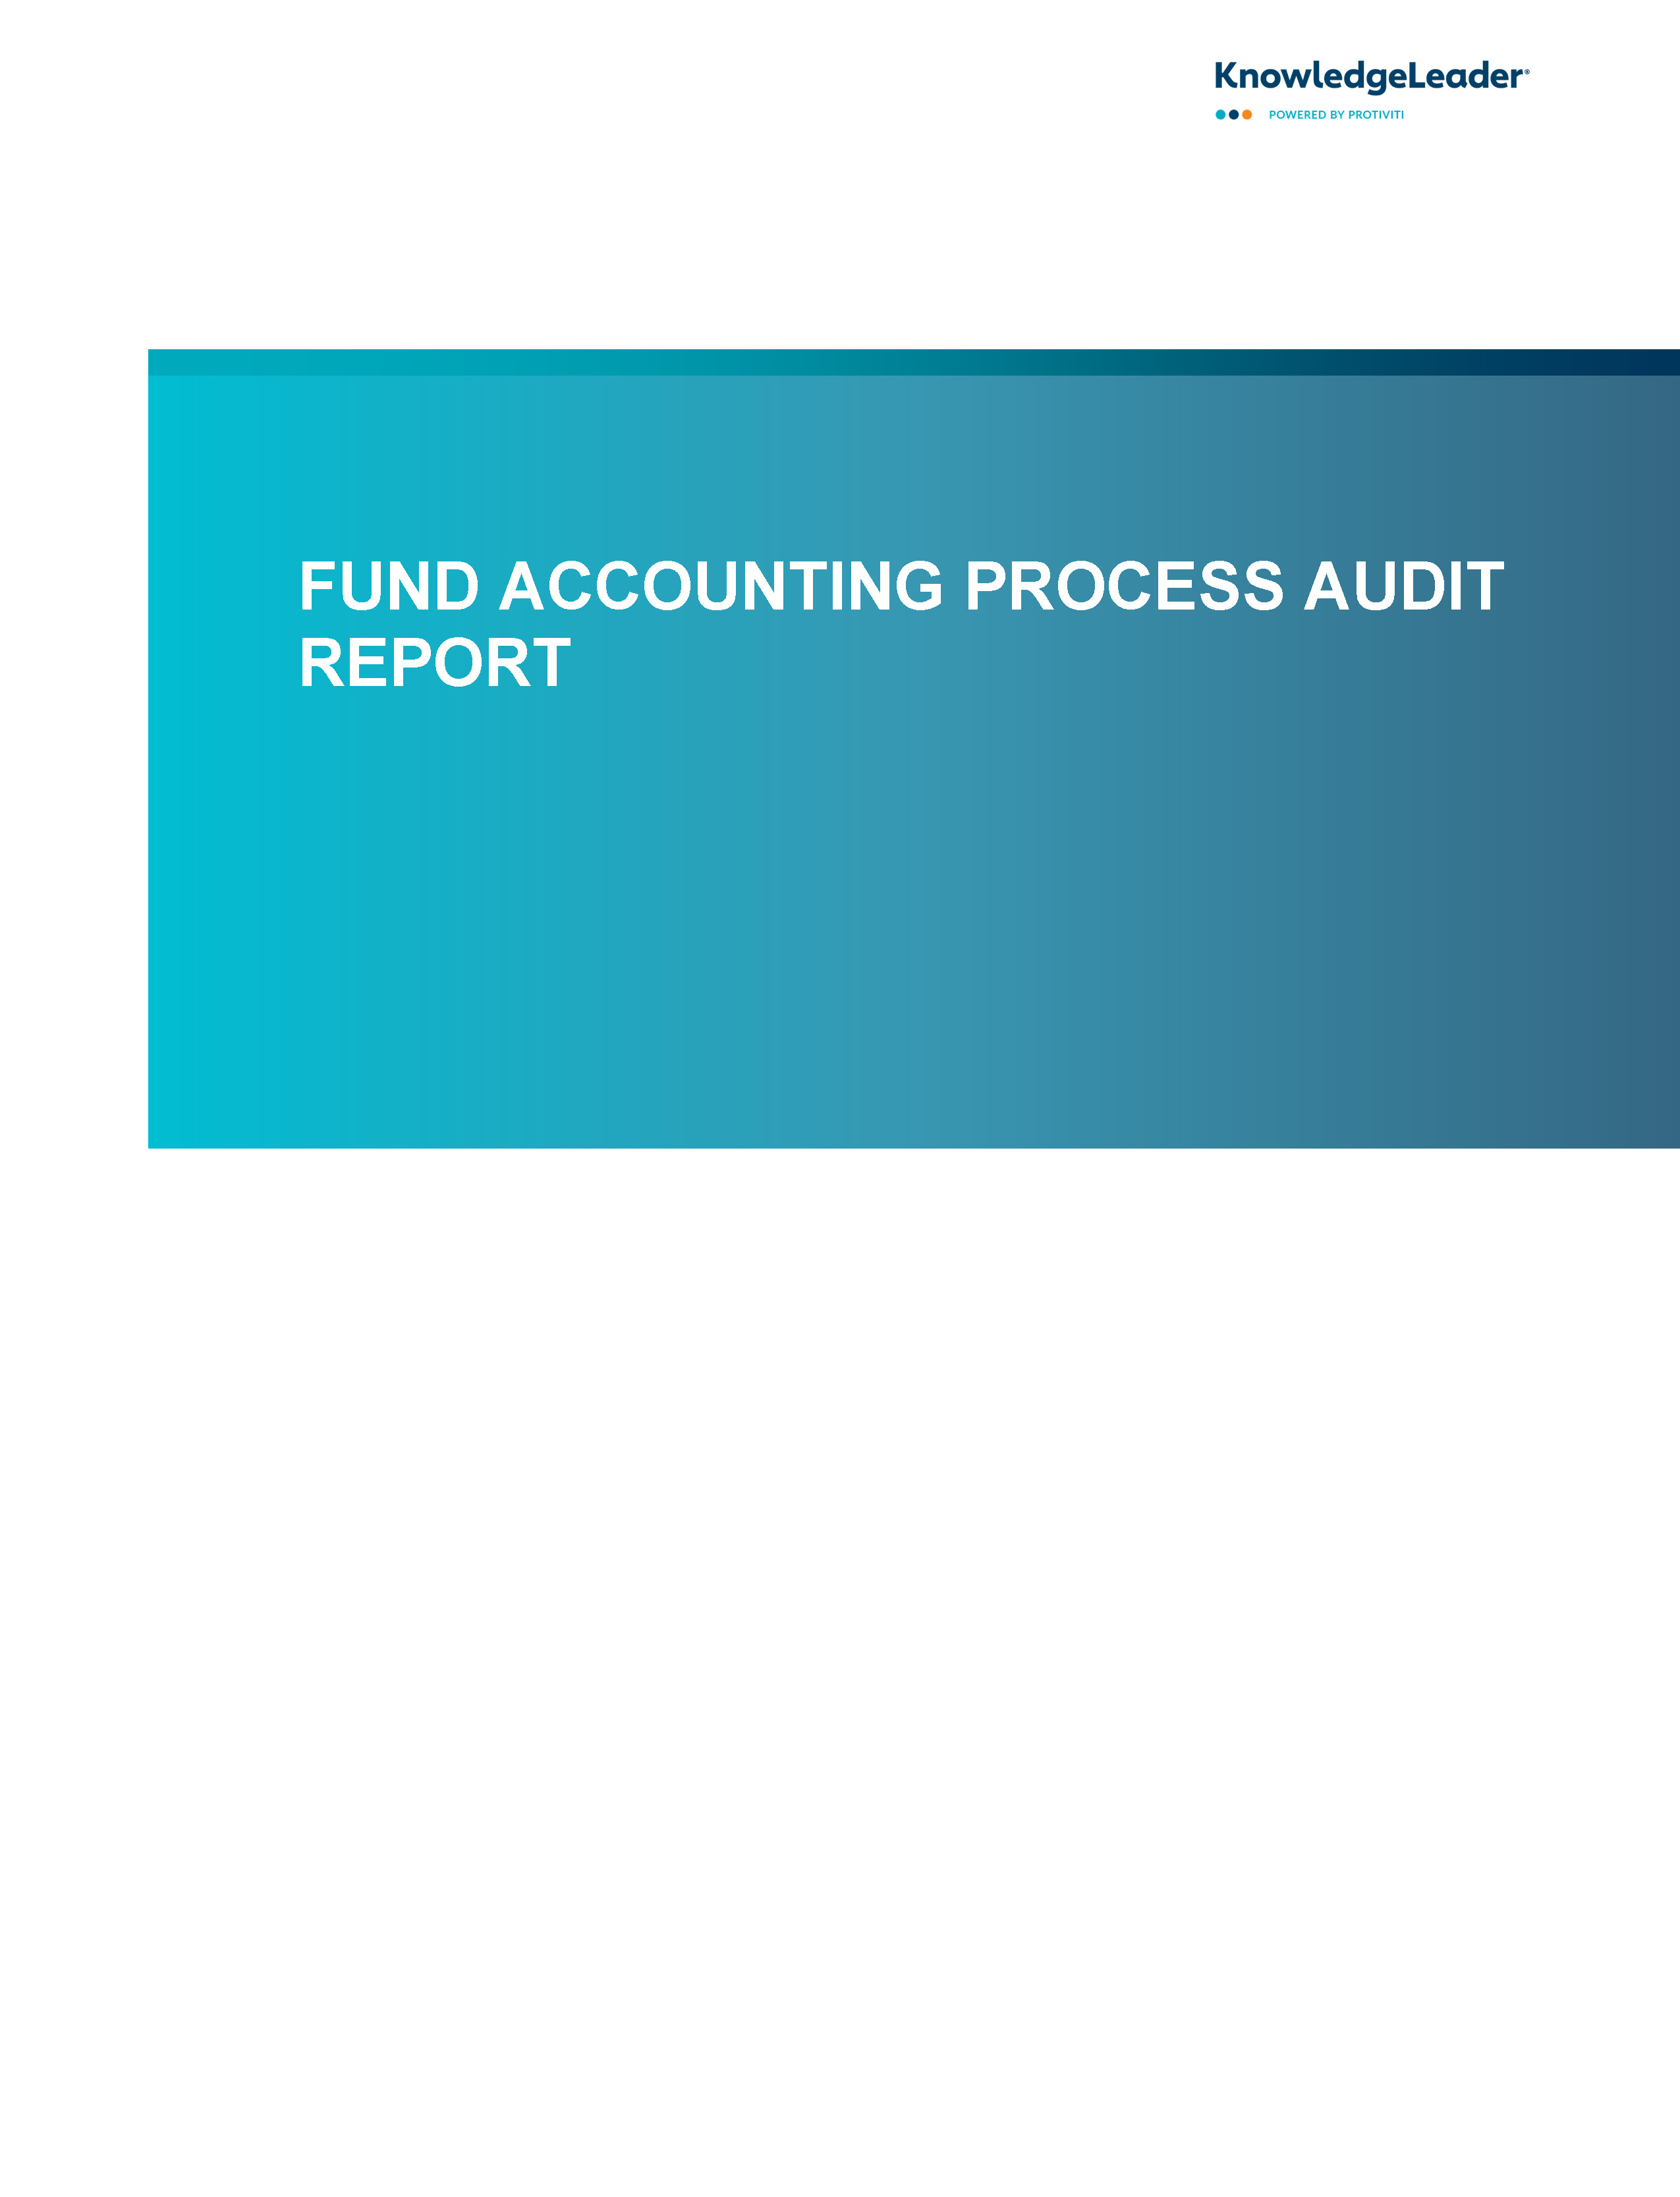 Screenshot of the first page of Fund Accounting Process Audit Report